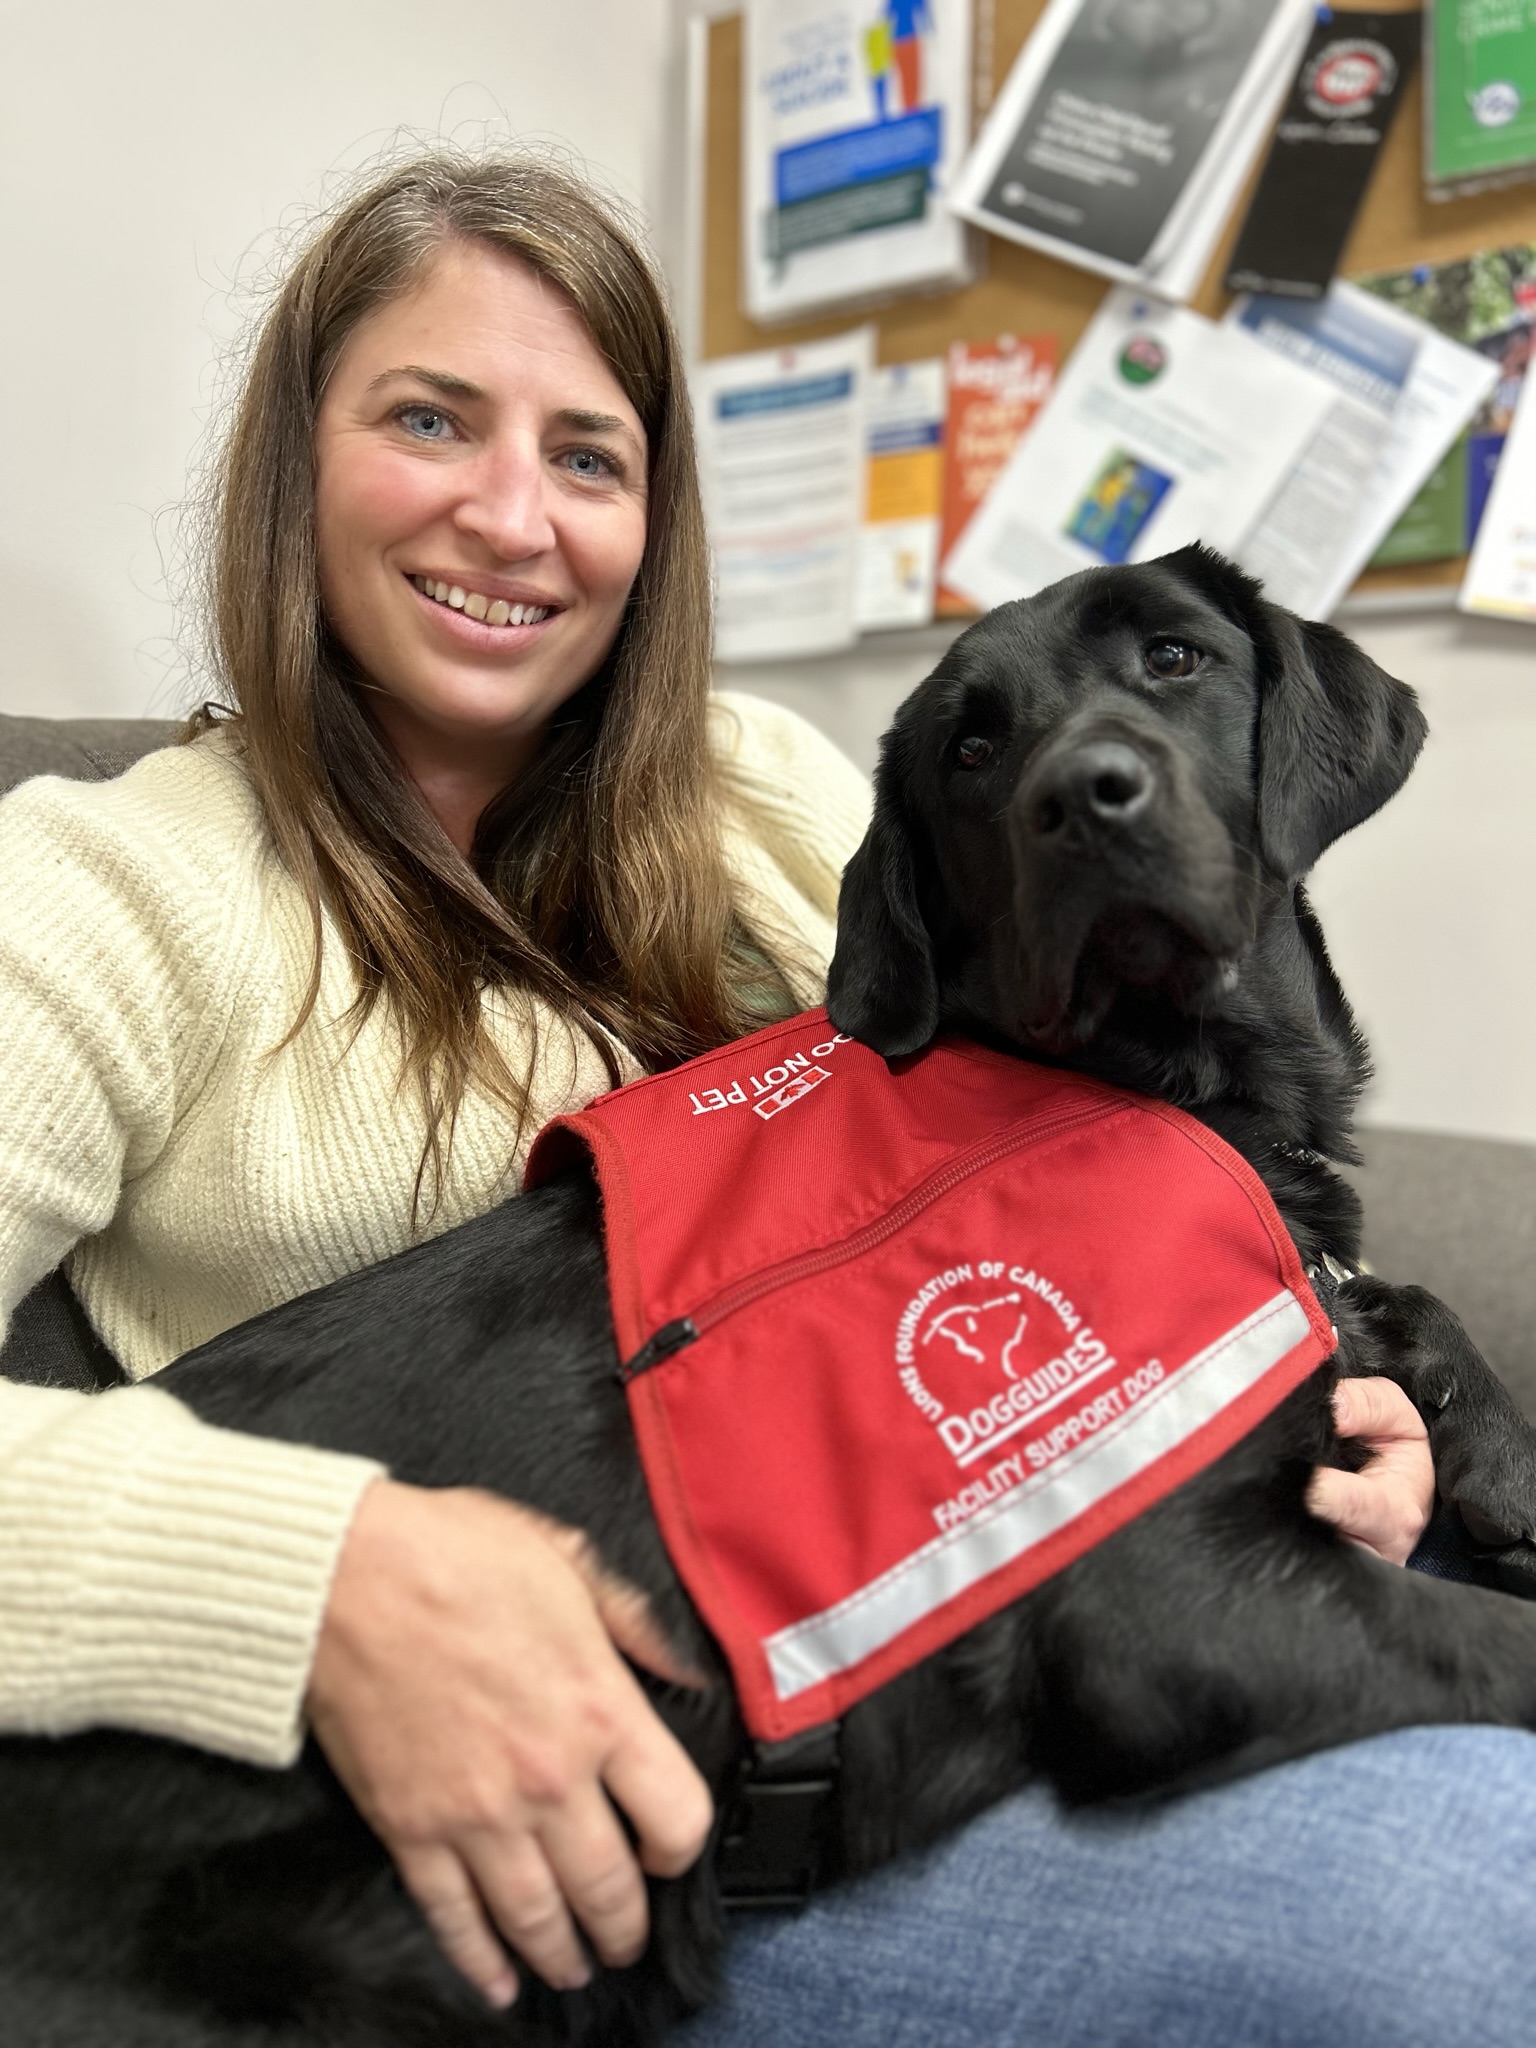 Ireland, RDKB's Furry Hero, Goes Social and Offers Comfort to Those in Need